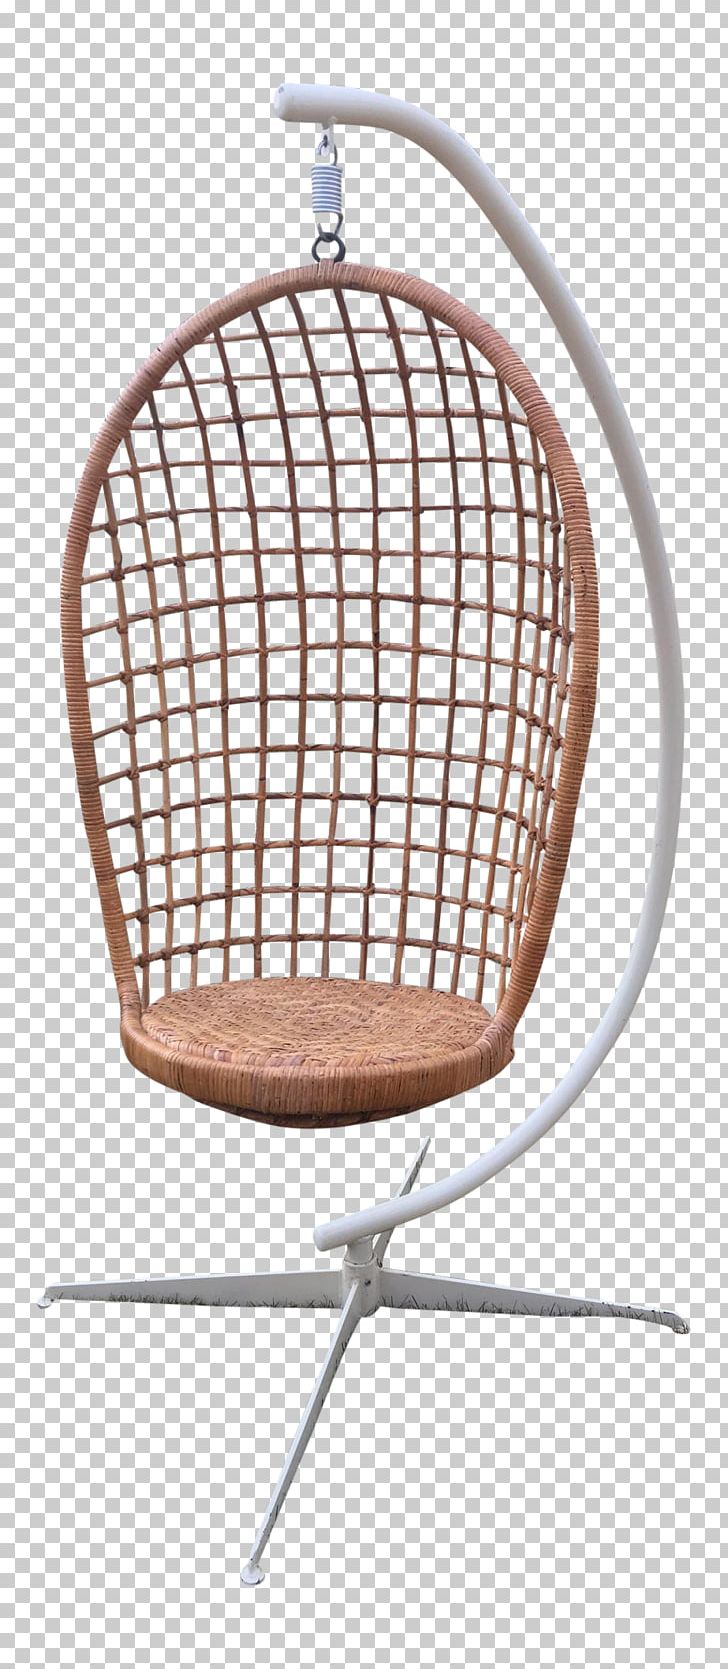 Chair Egg Wicker Furniture Rattan PNG, Clipart, Art, Bamboo, Basket, Bohochic, Chair Free PNG Download